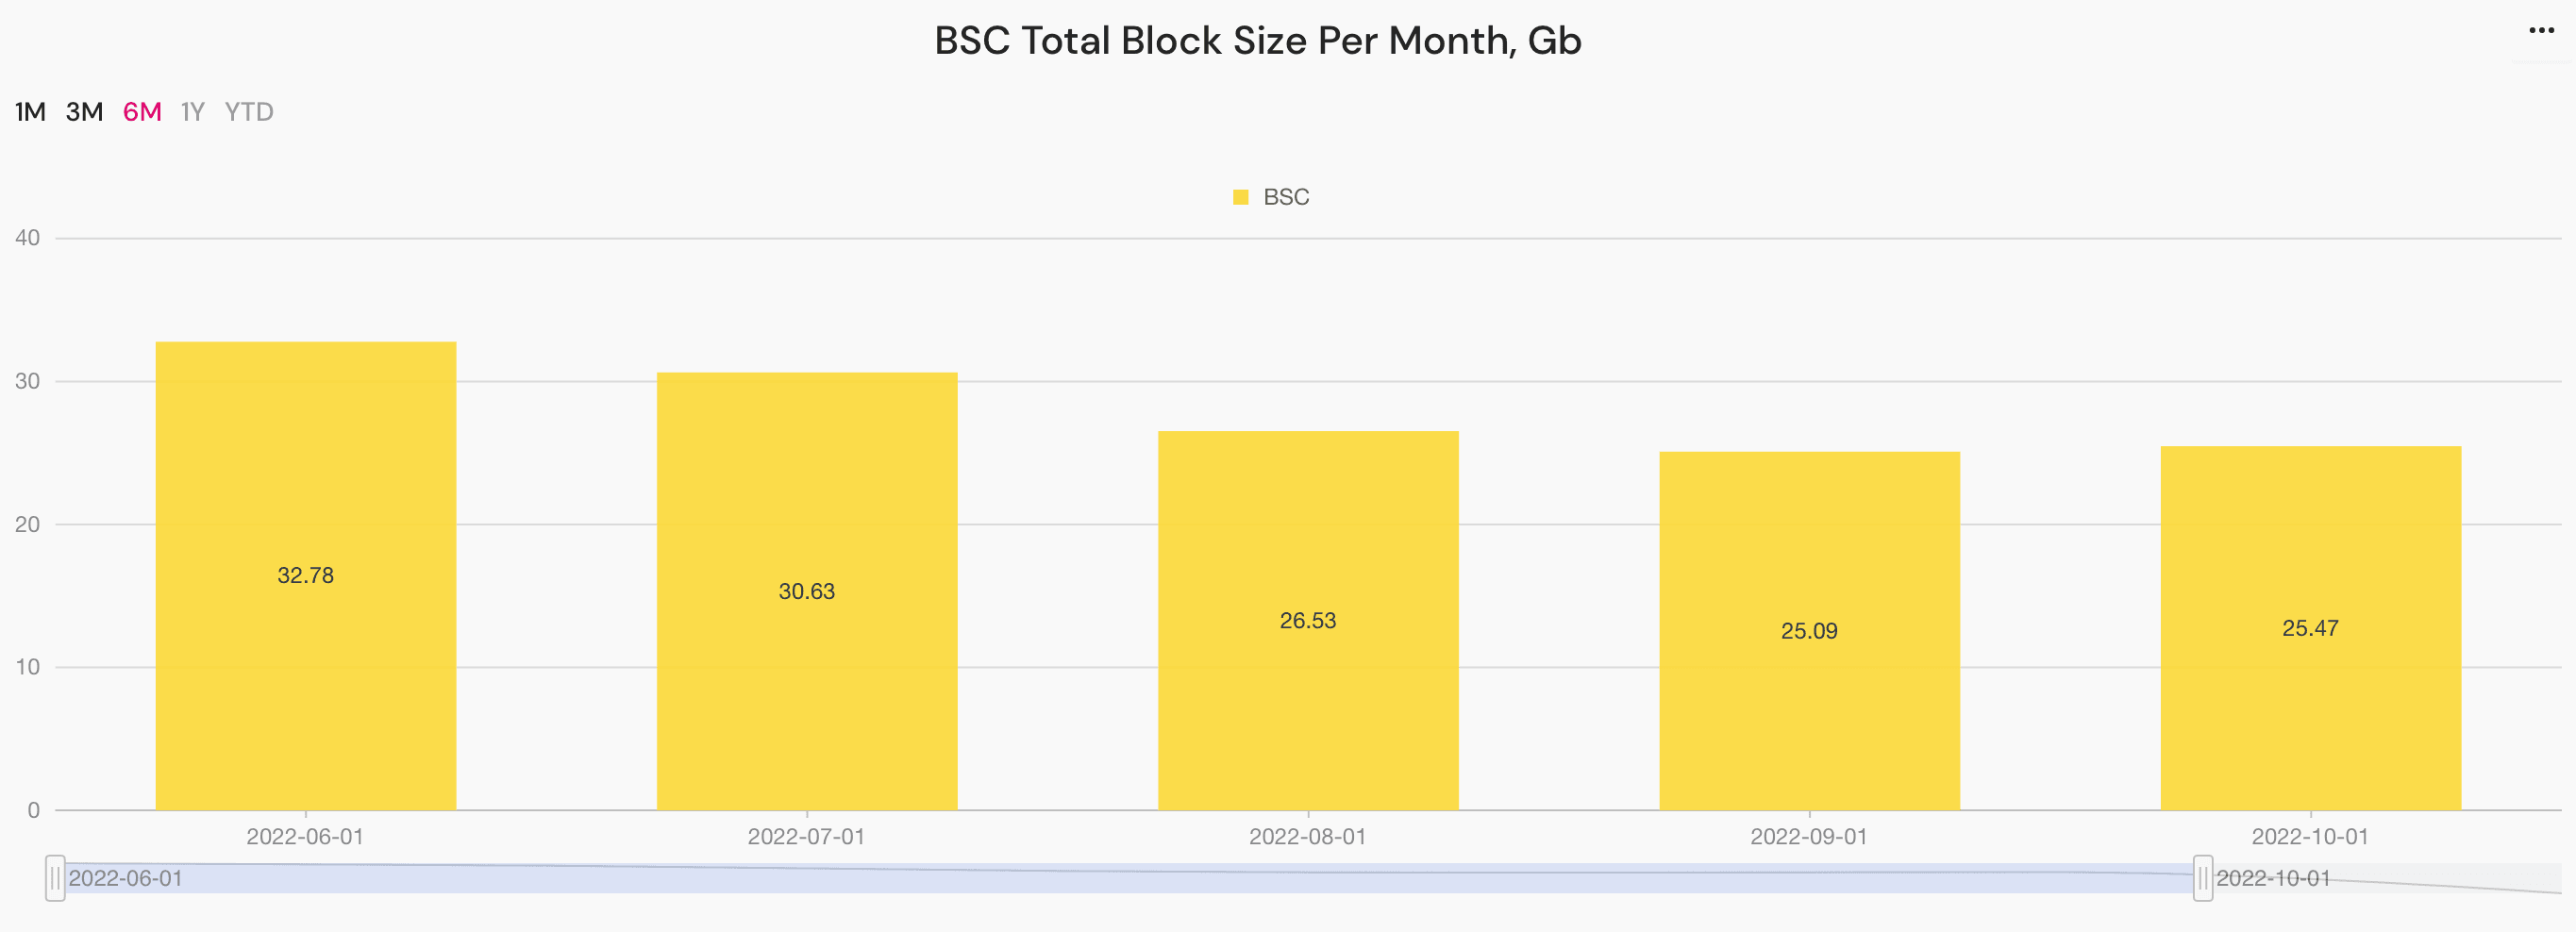 BSC Total Block Size Per Month